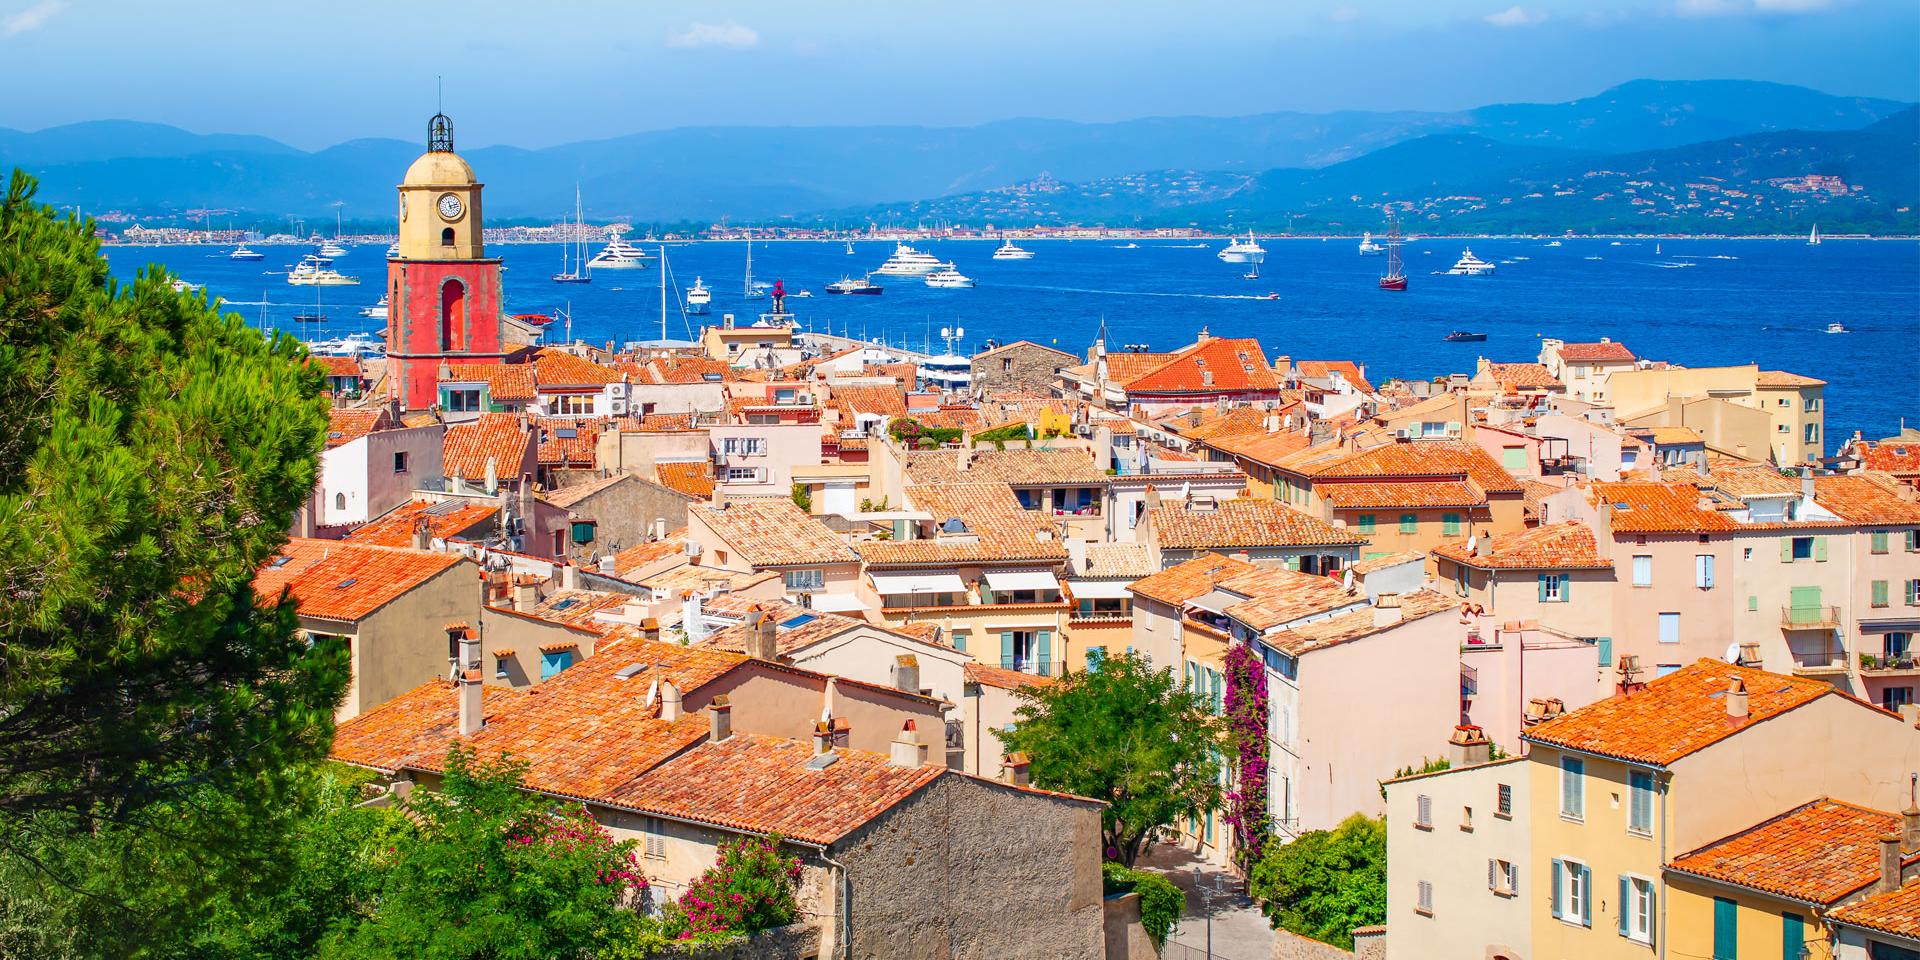 Want To Discover The Best Of St Tropez?